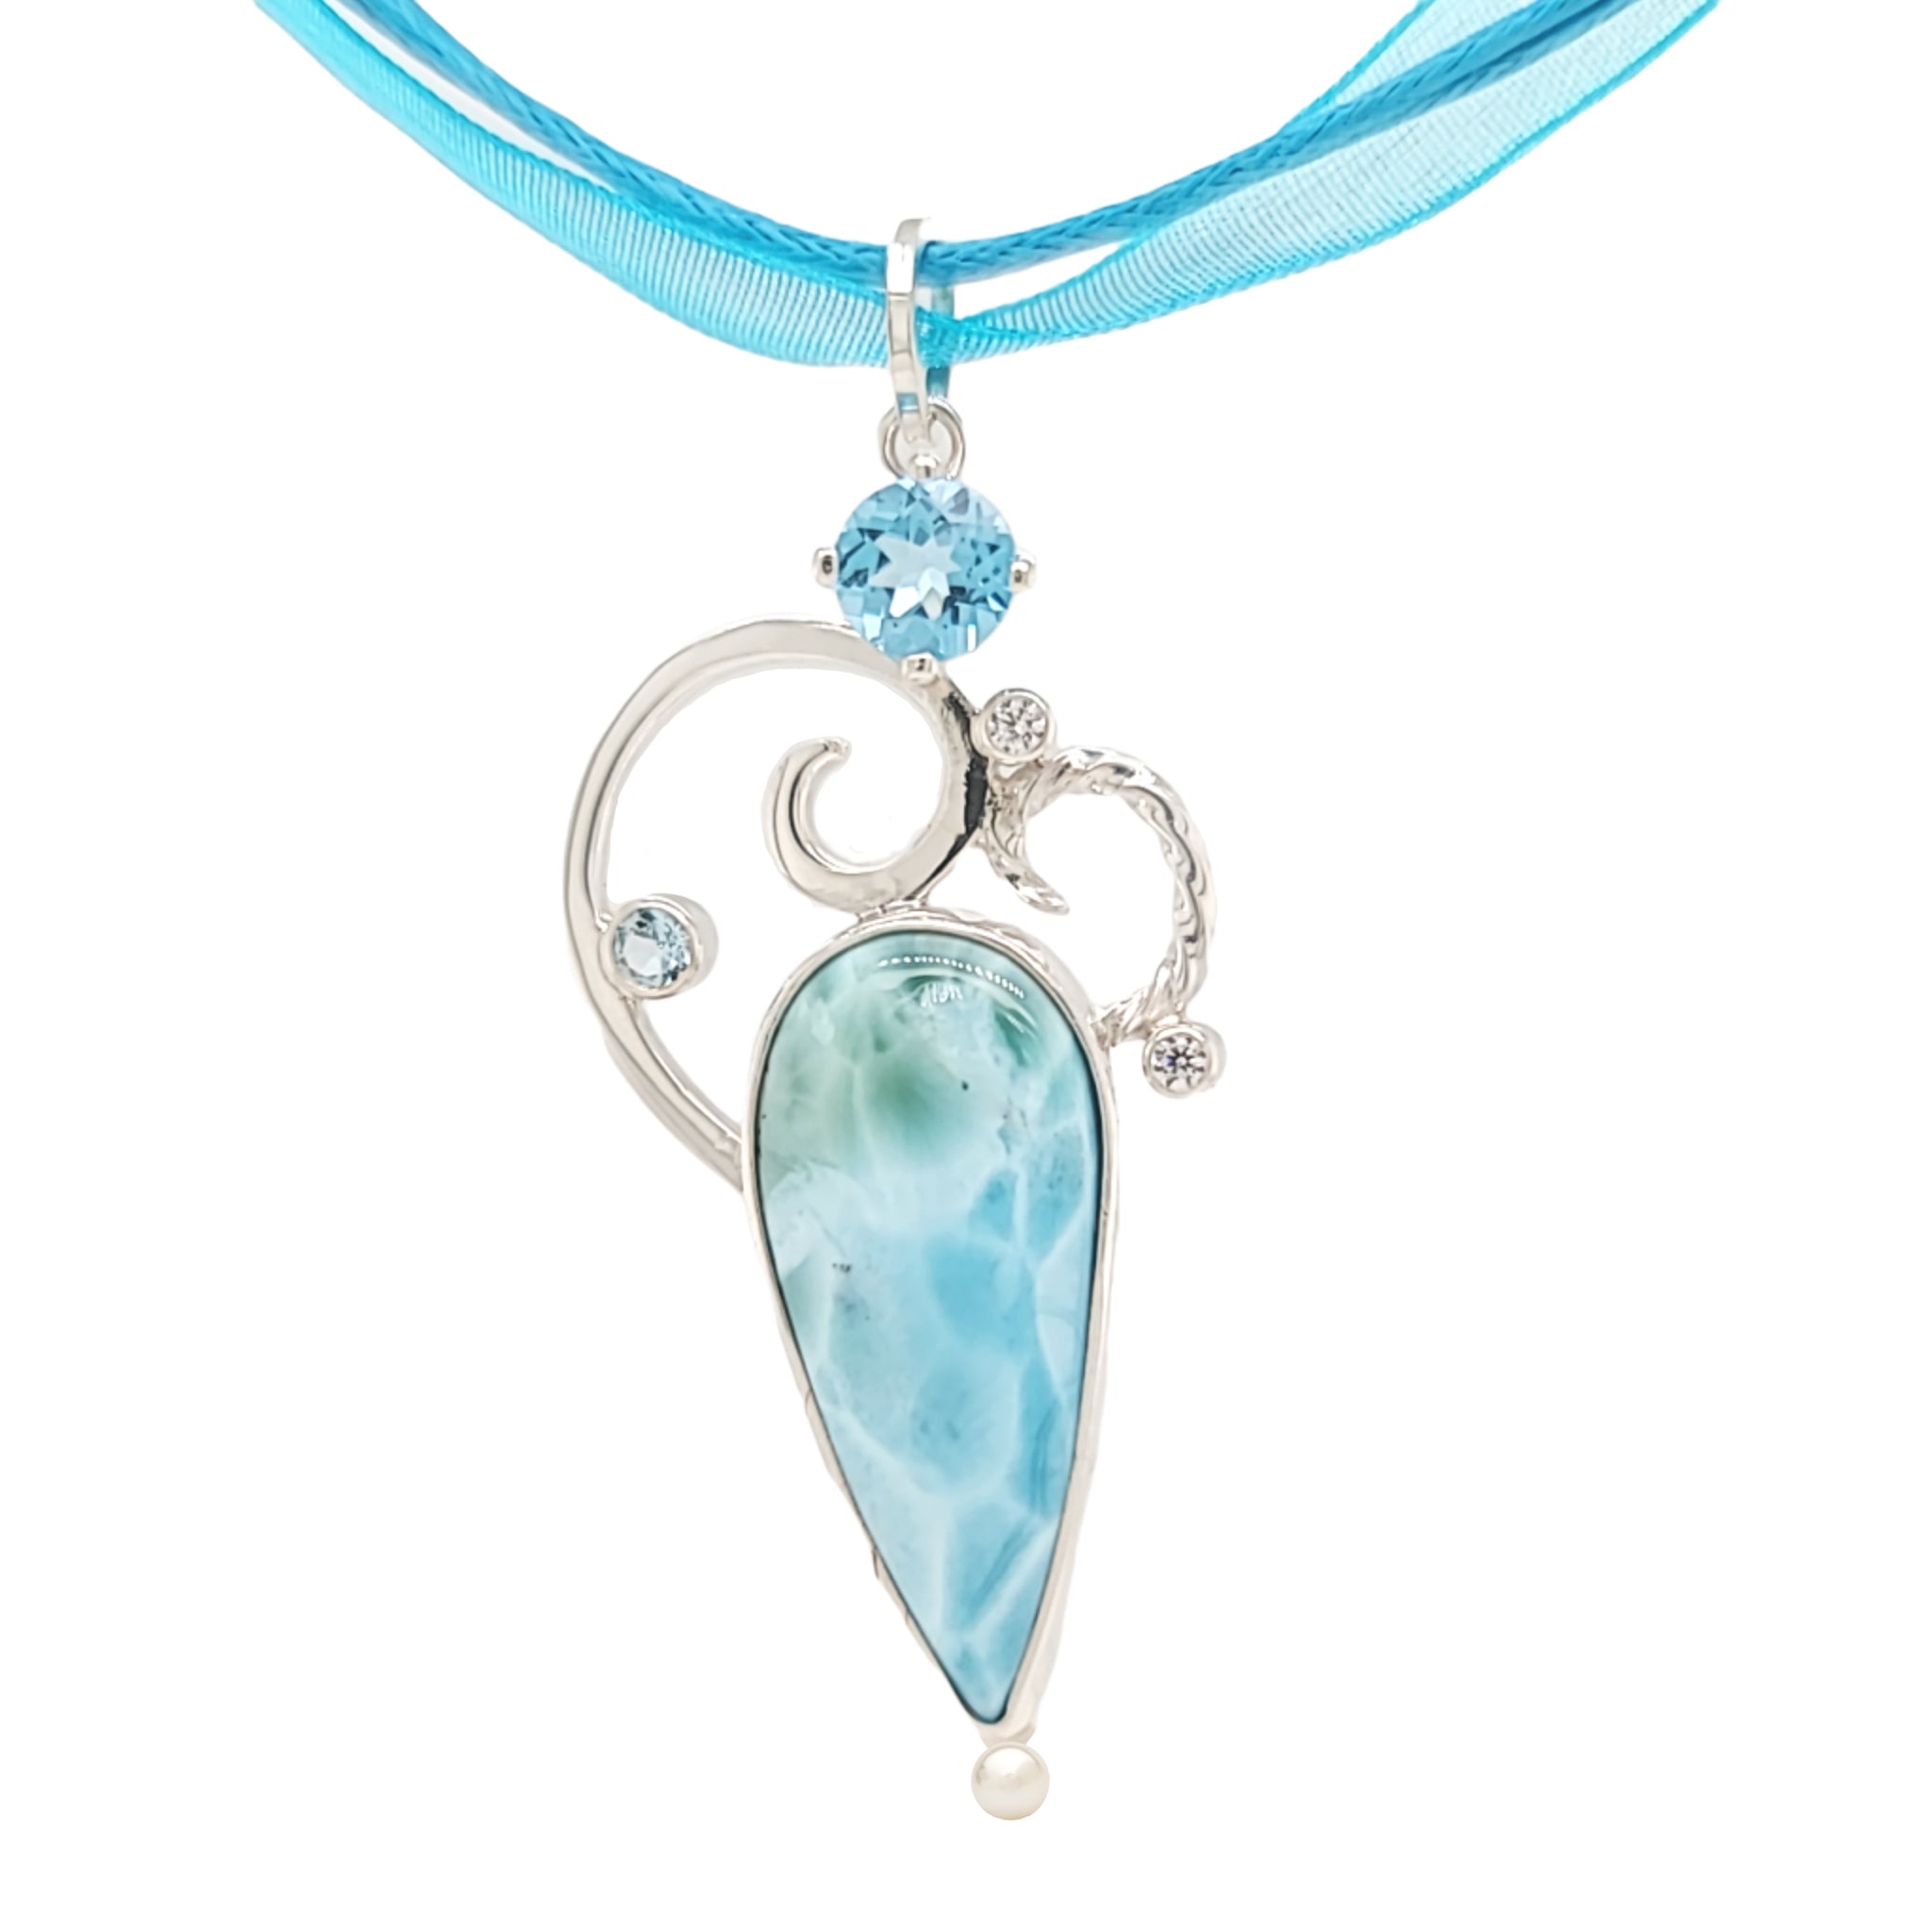 Caribbean blue Larimar pendant with Swiss Blue Topaz and Freshwater Pearls.